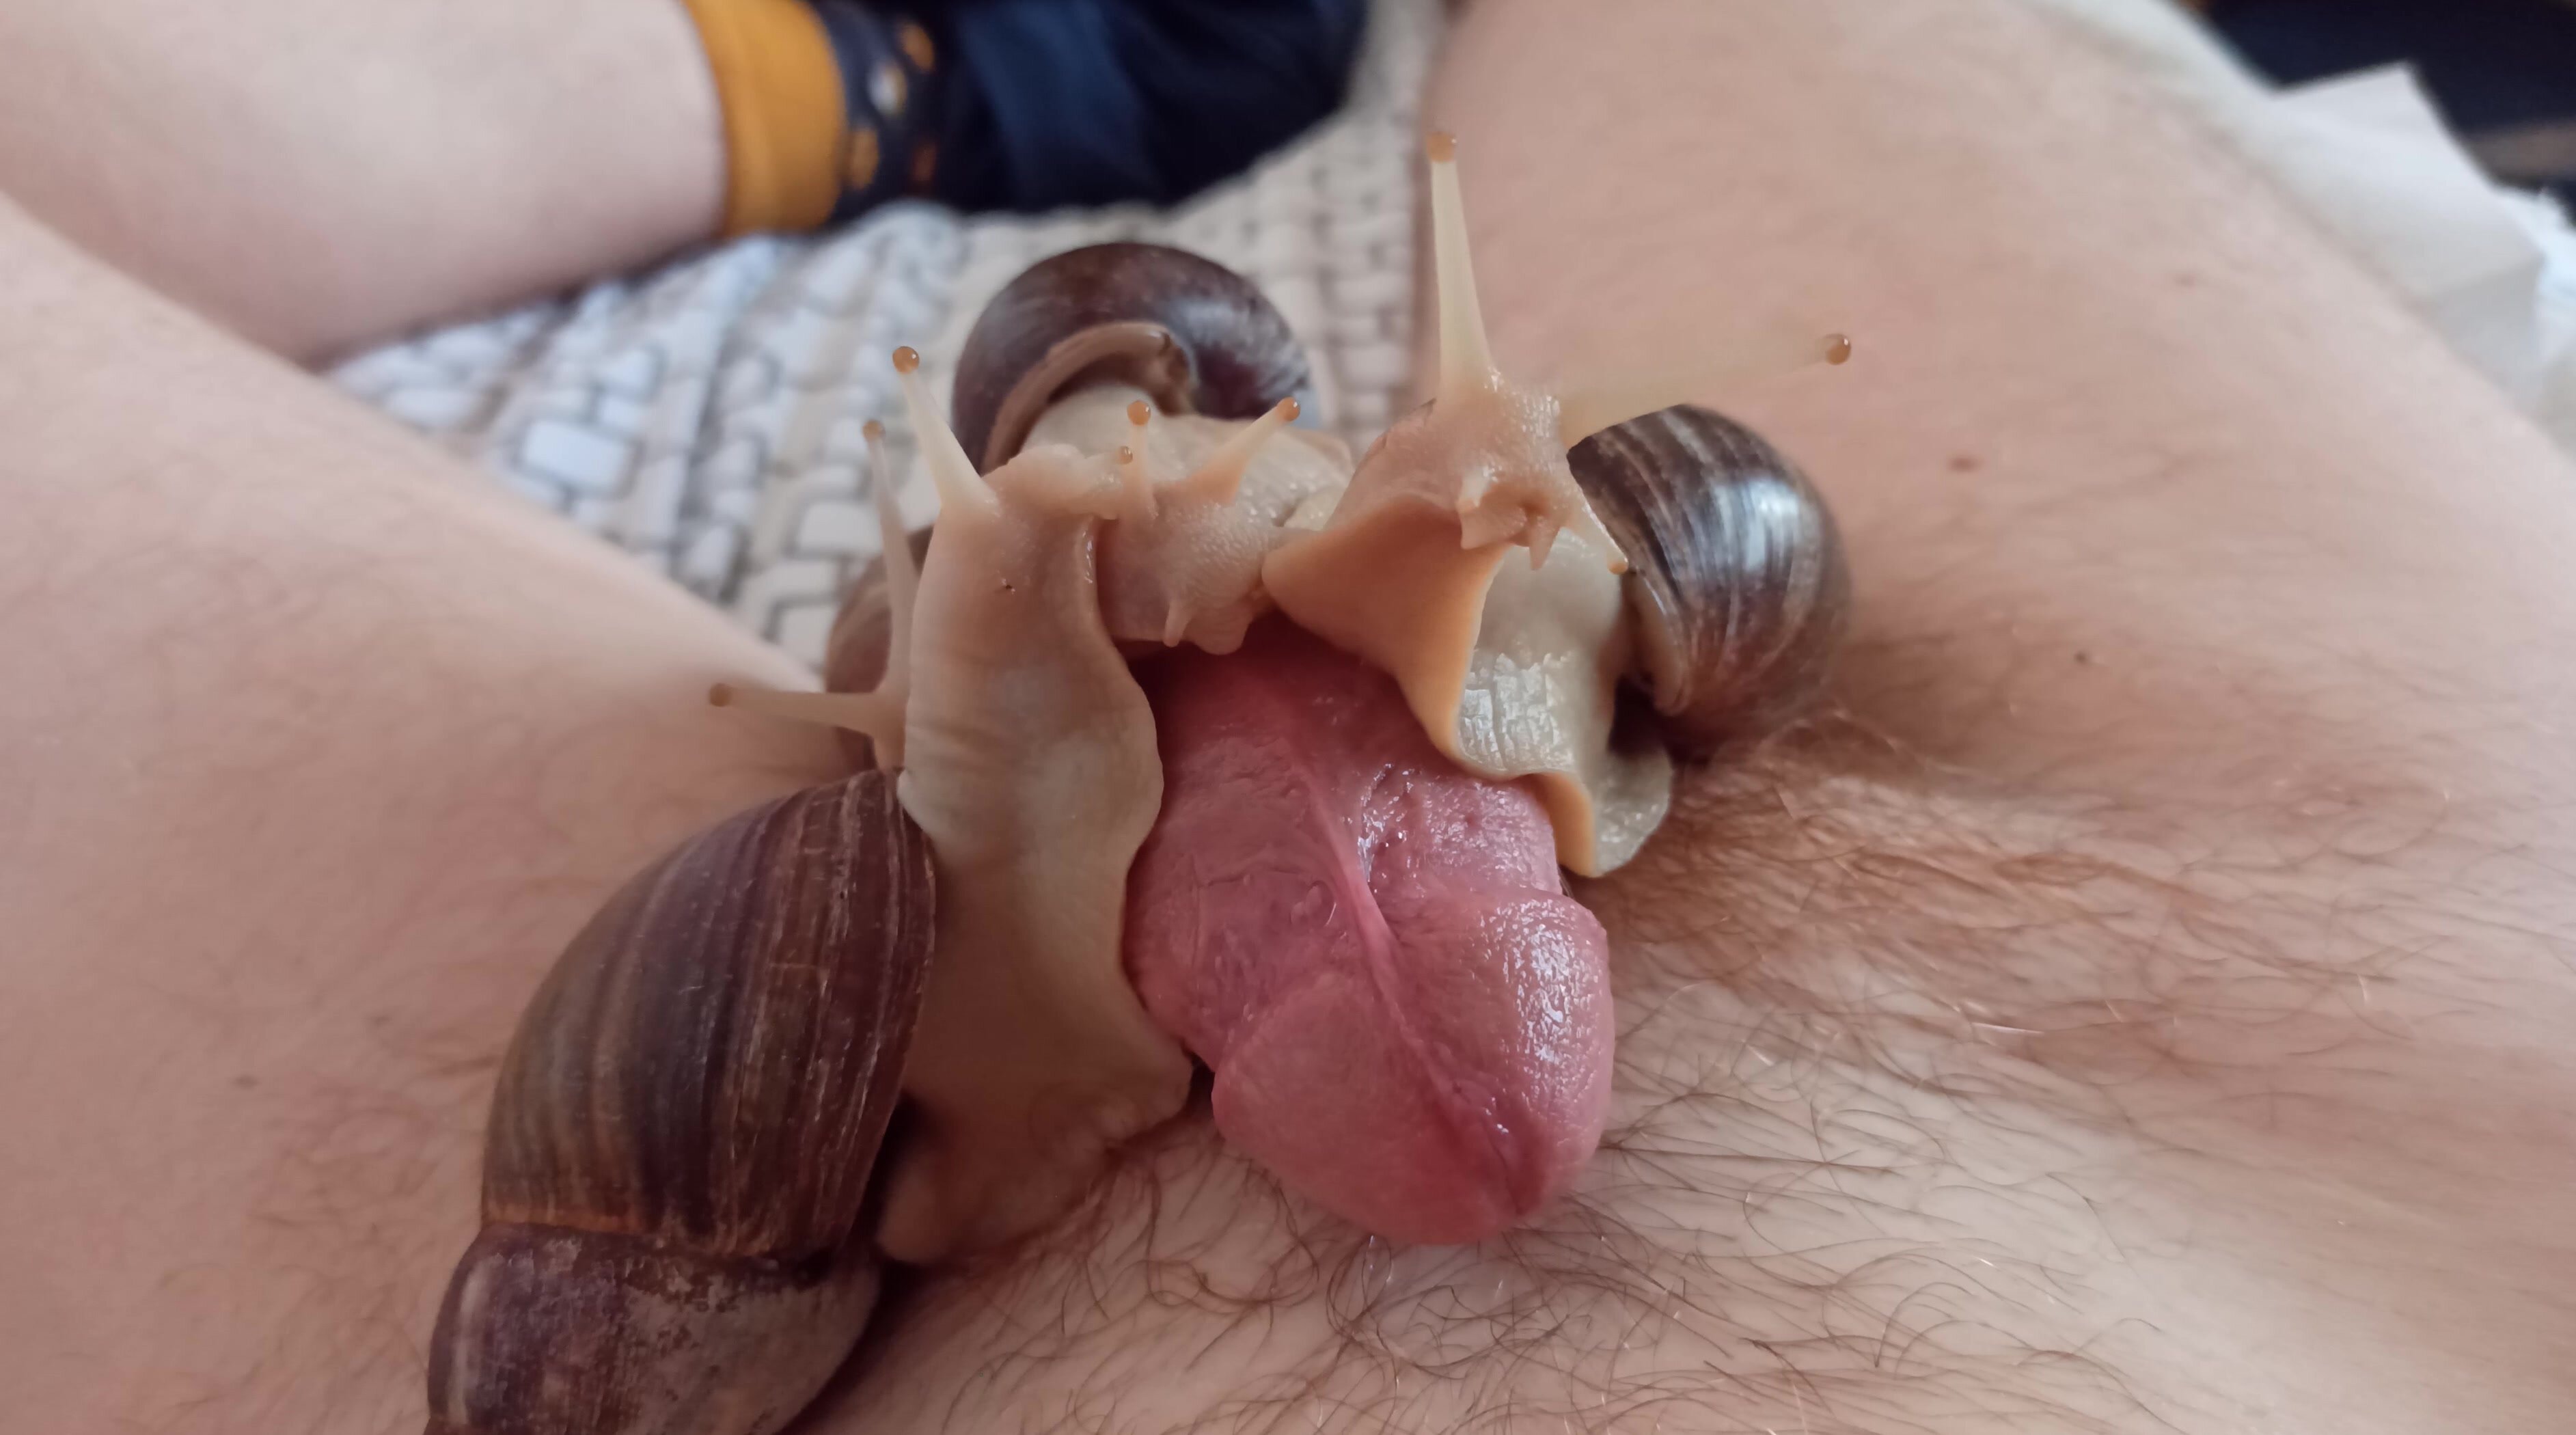 Giant snails almost make me moan with their touch